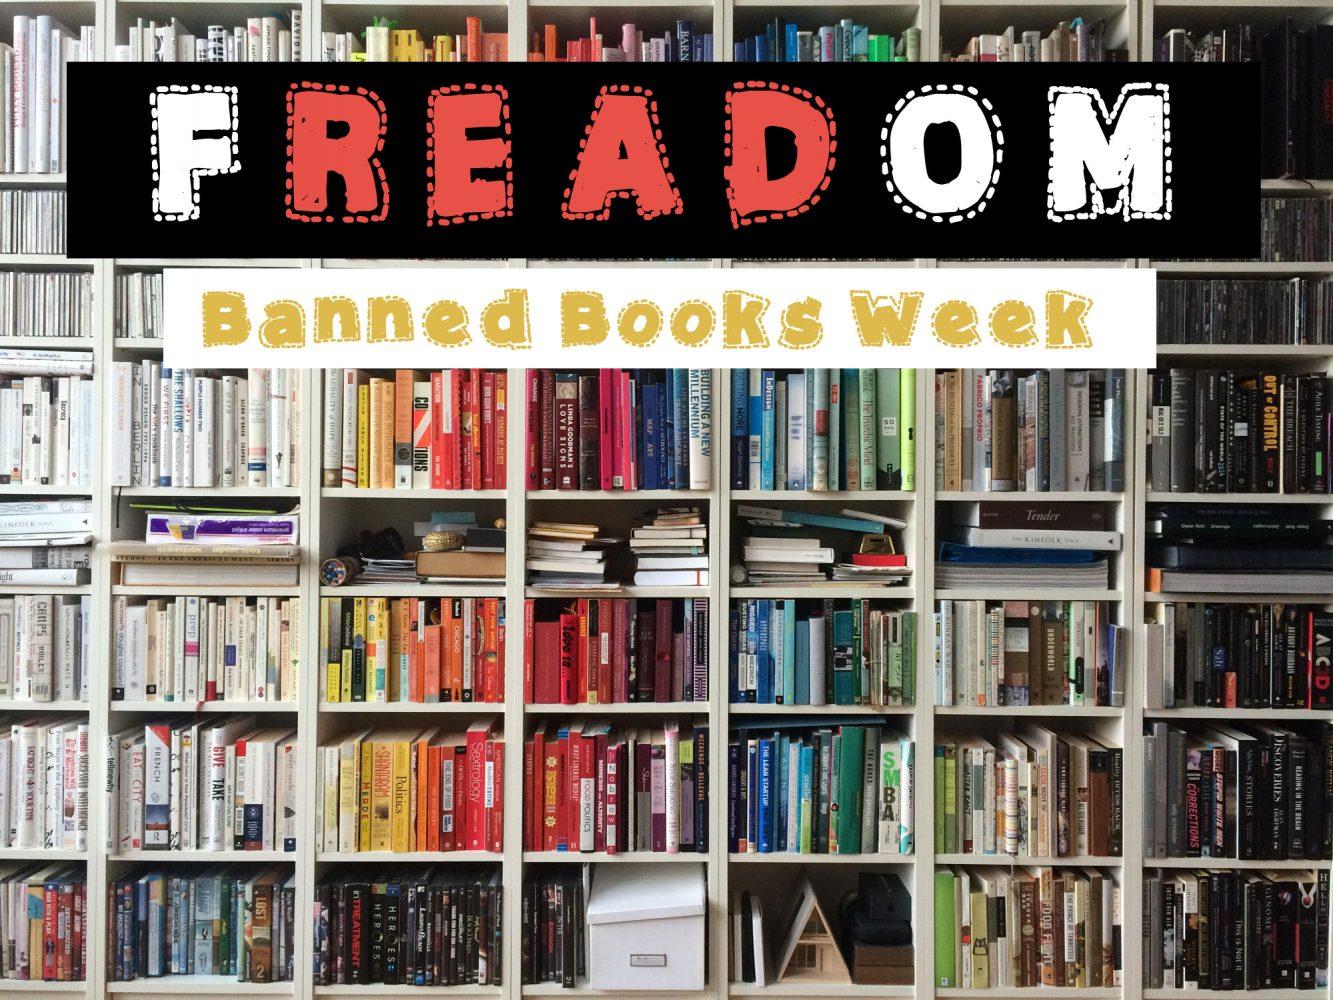 Get+caught%3A+Banned+Books+Week+in+the+IRC